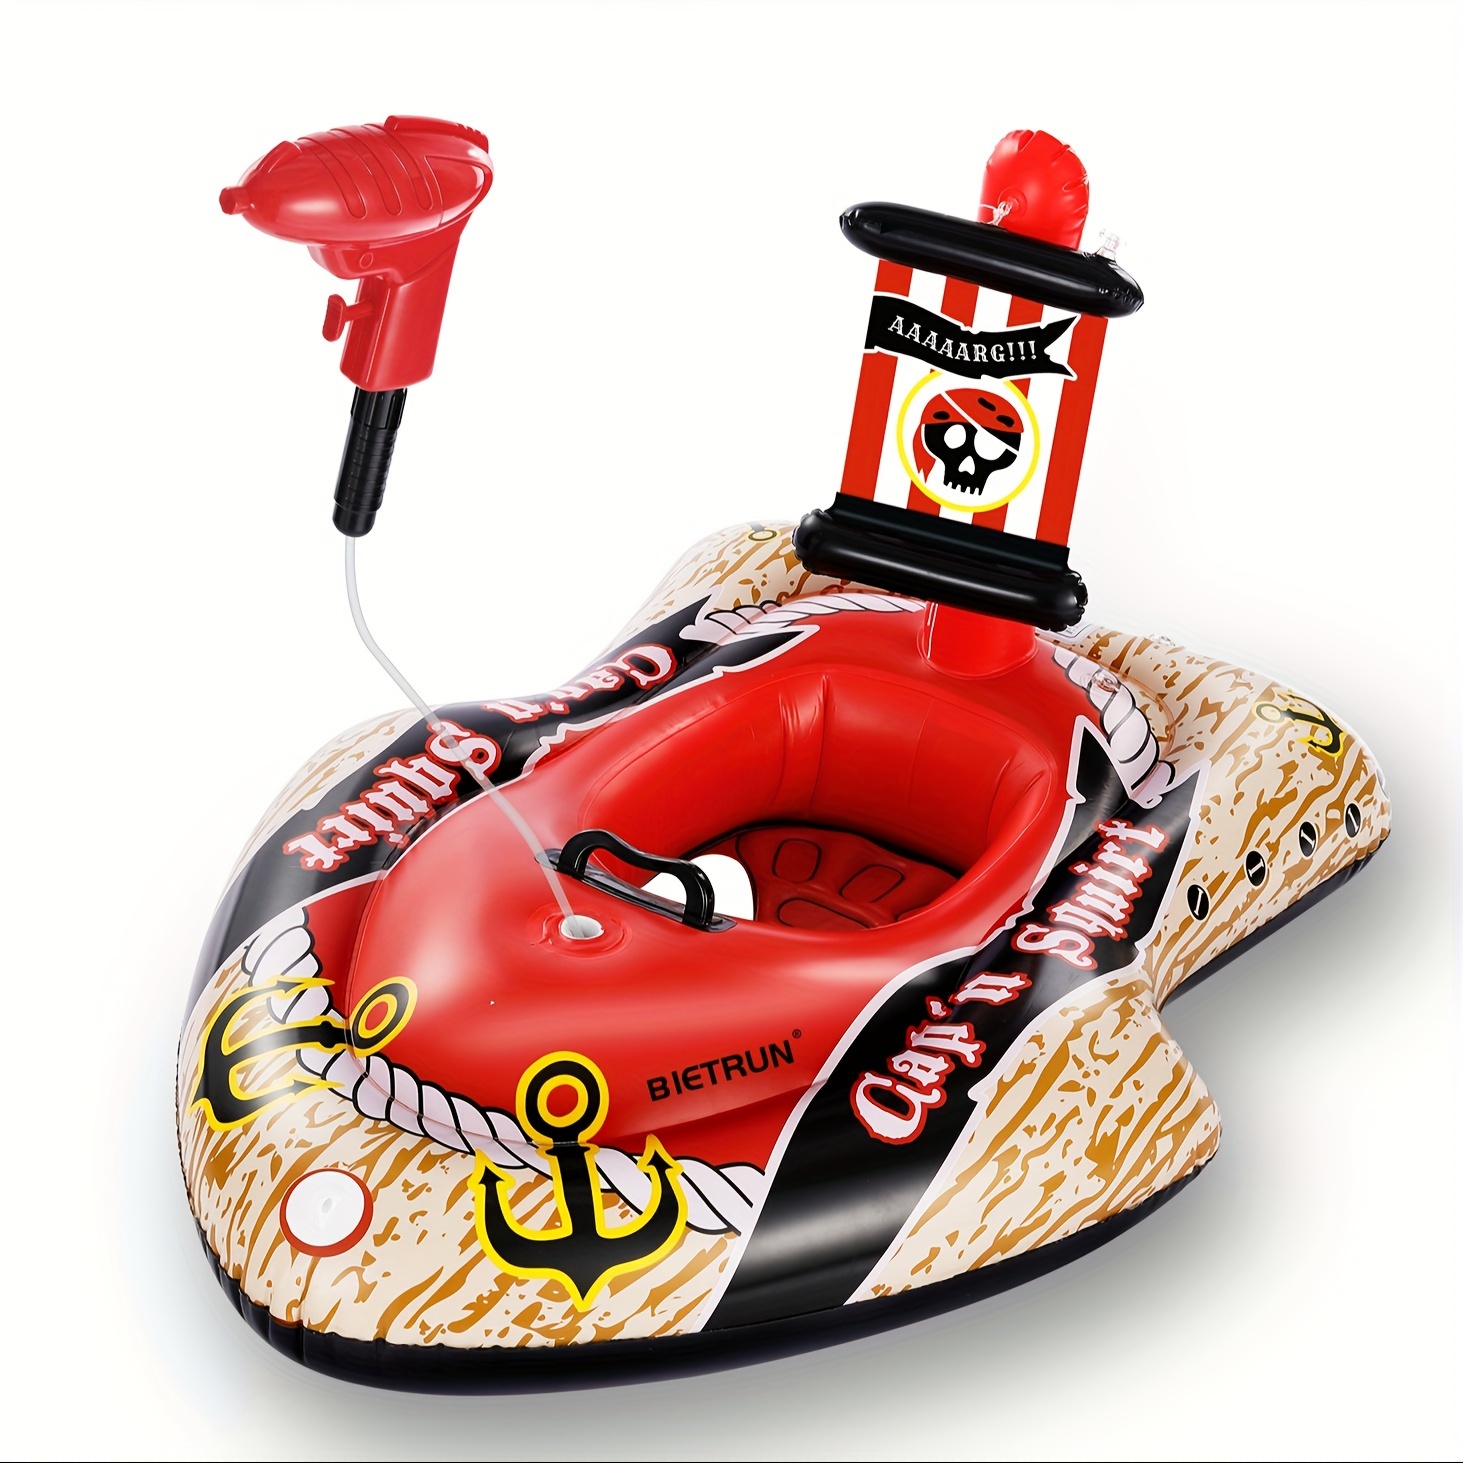 

Bietrun Pool Floats Kids With Water (pirate-style)(with Pump), Fun Solo Kids Swimming Inflatable Thickening Rafts Pool Lounger Pirate Ship For Boys Girls Pool Party Gift, Beach, Lake Sunbathing